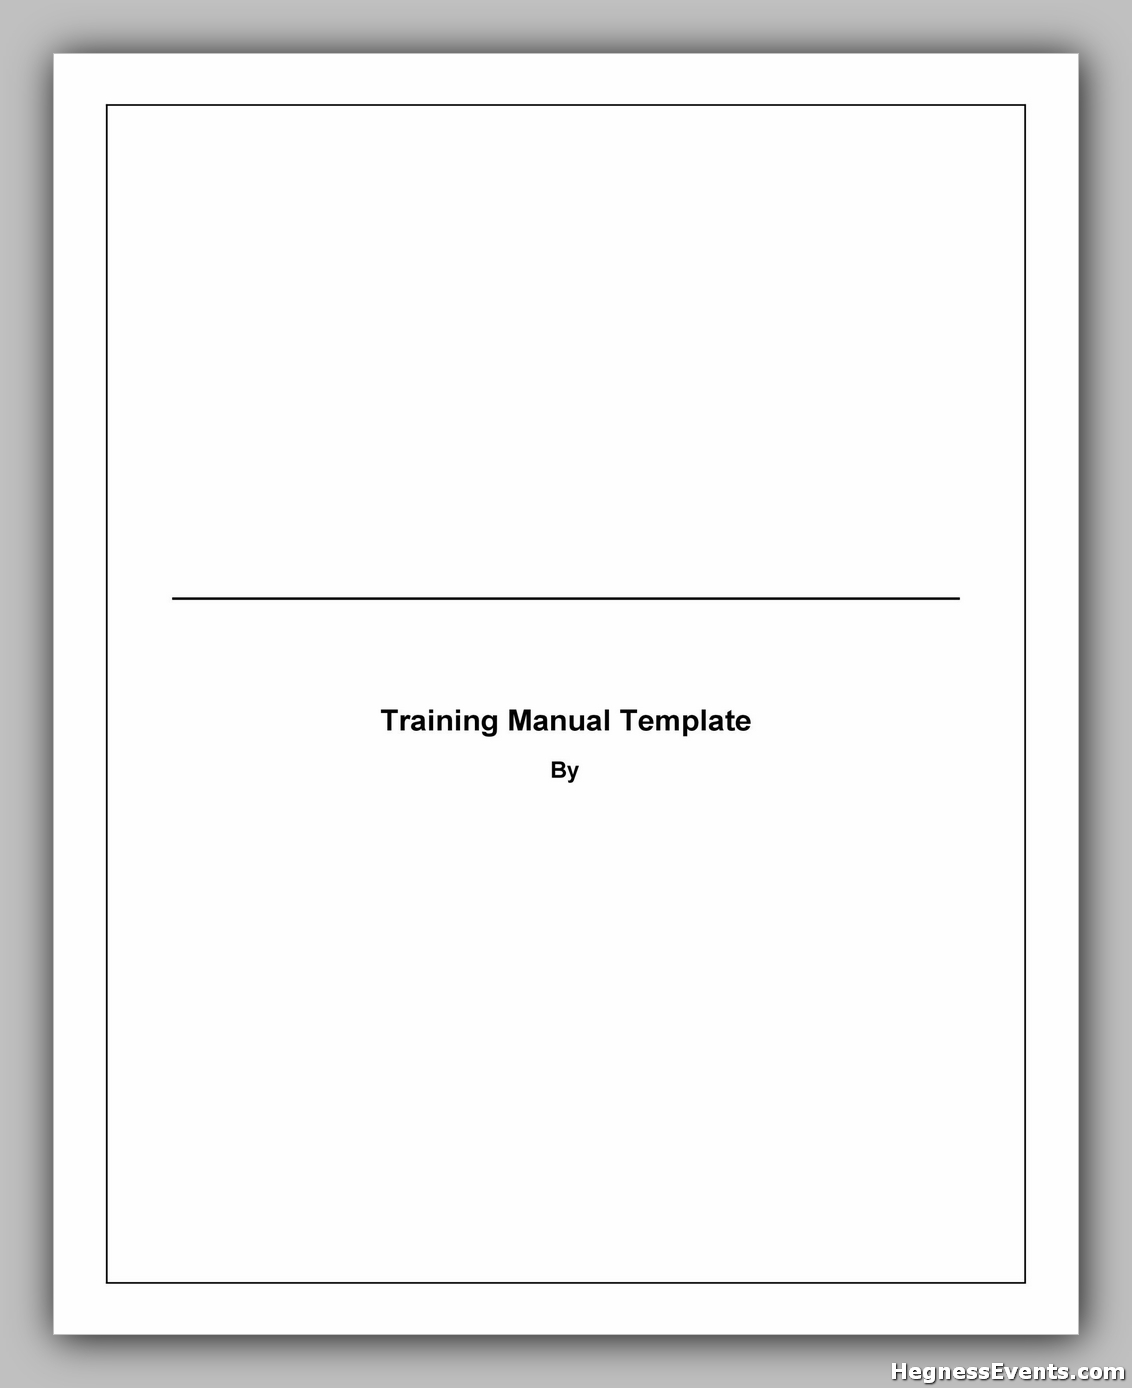 50 Training Manual Template Word Free hennessy events